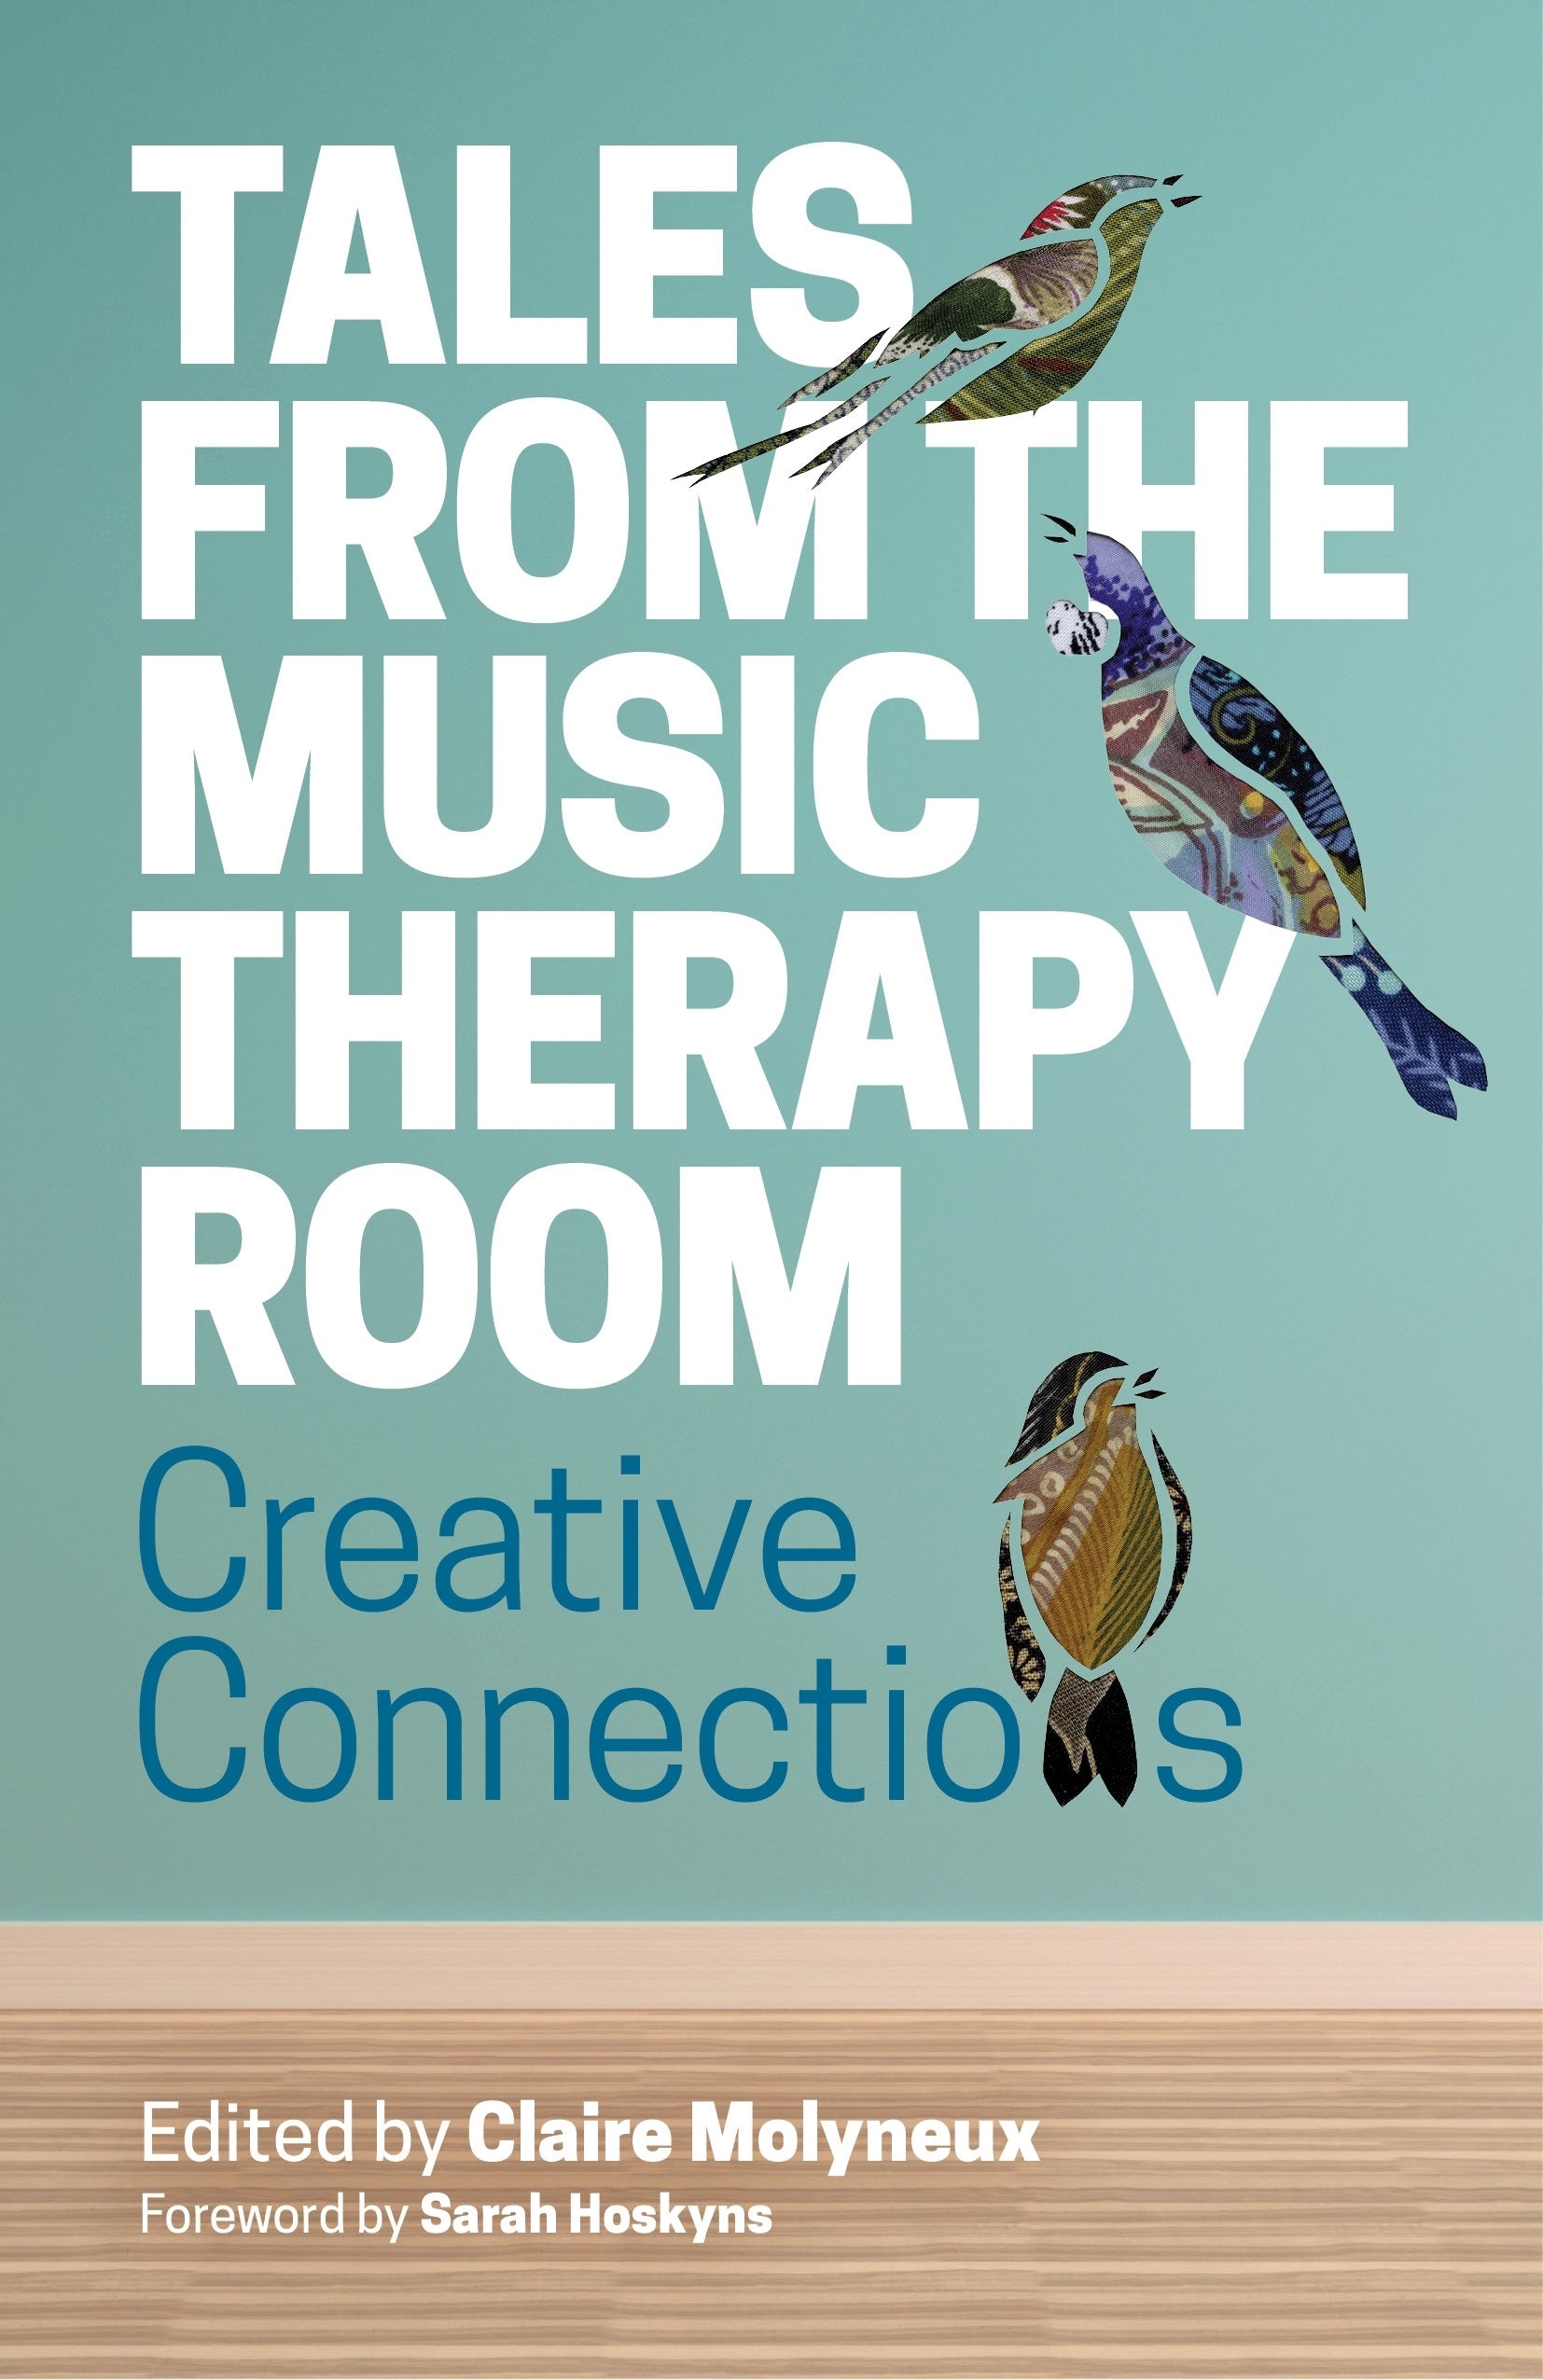 Tales from the Music Therapy Room by Claire Molyneux, Sarah Hoskyns, No Author Listed